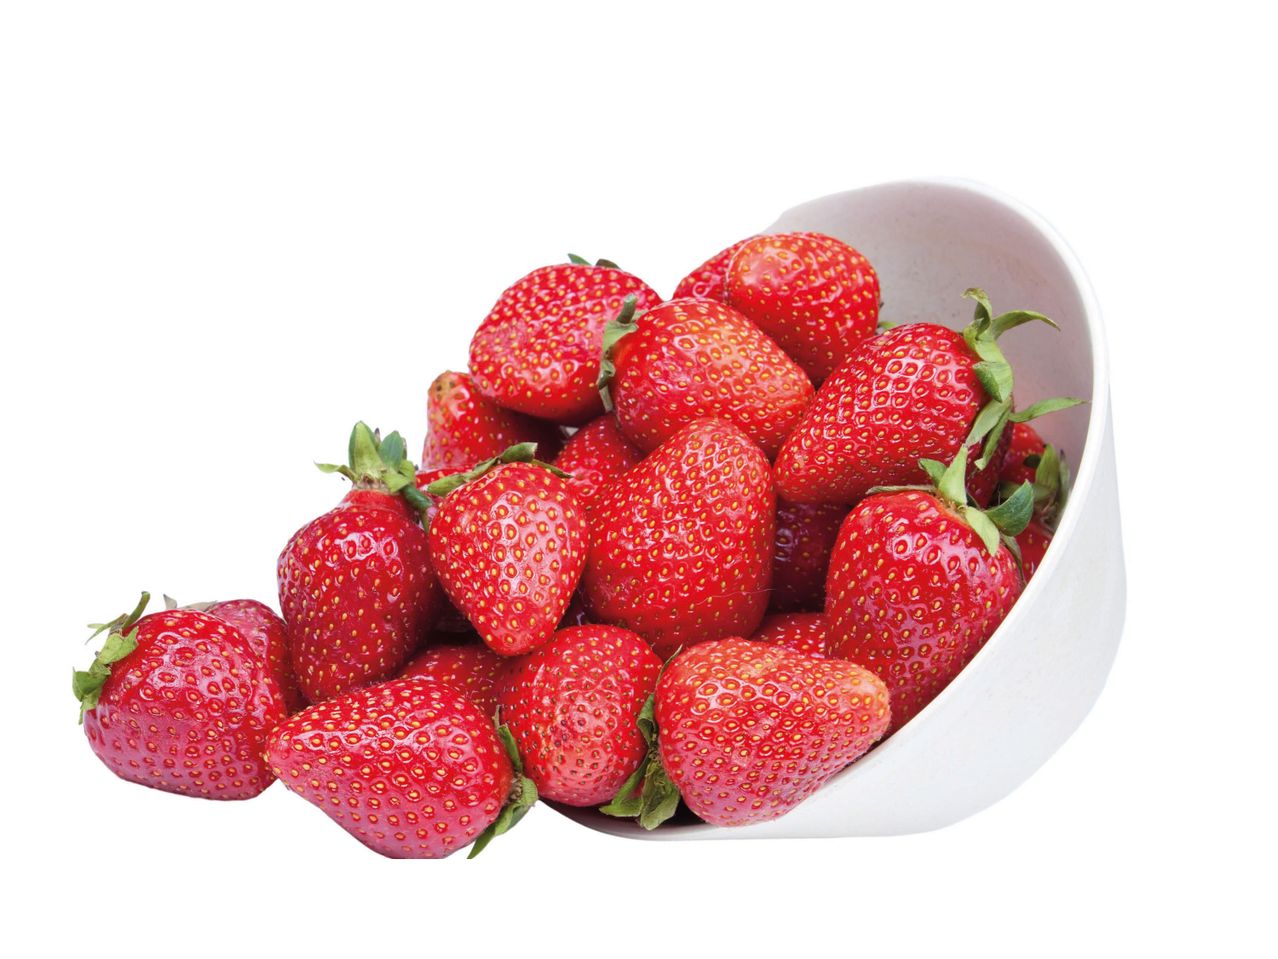 Go to full screen view: Strawberries - Image 1